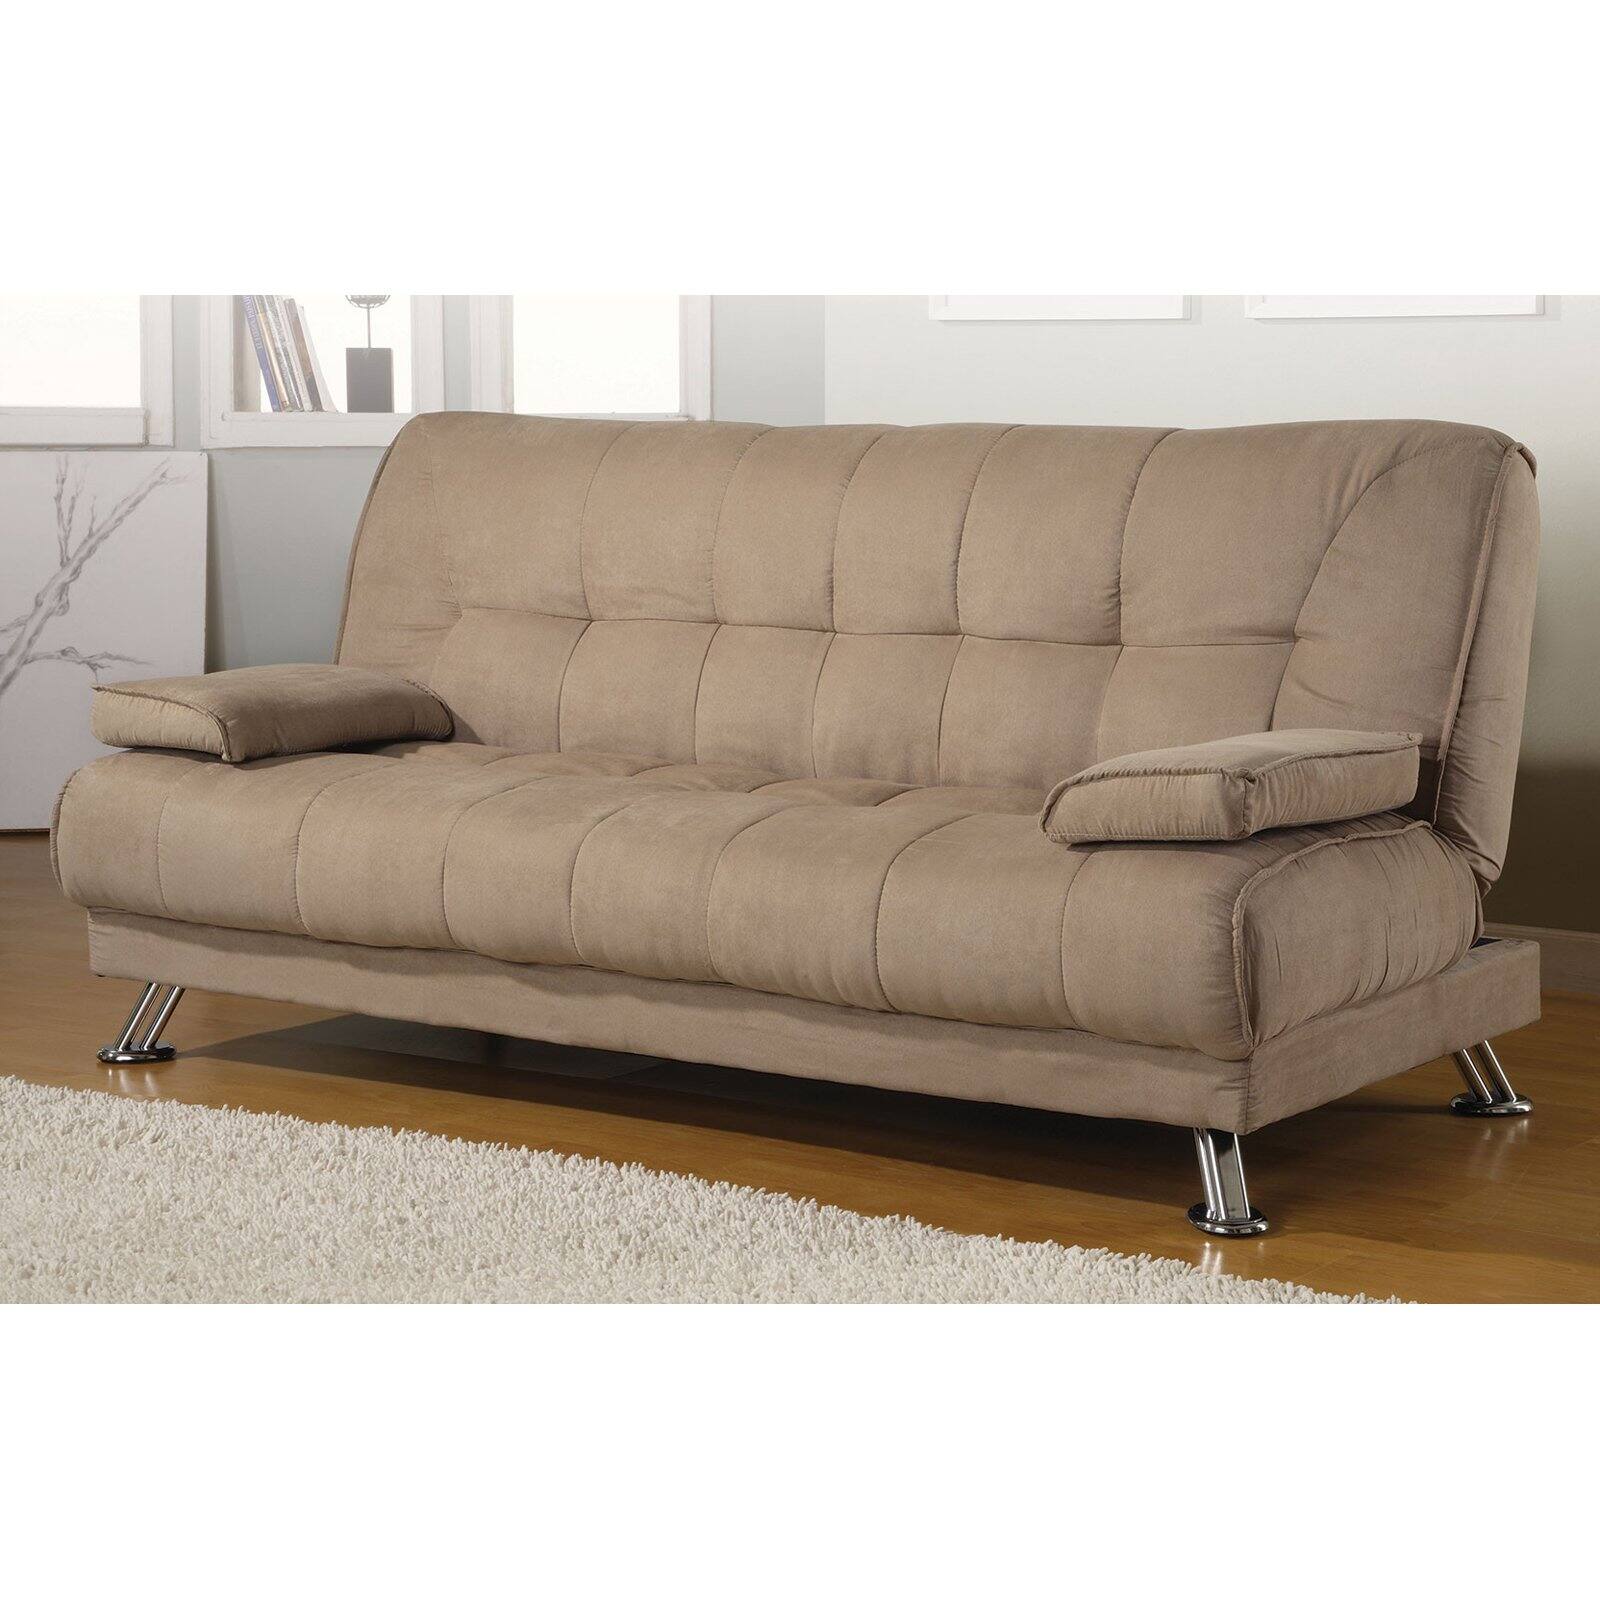 Braxton Leatherette Sofa Bed, Brown - image 2 of 4